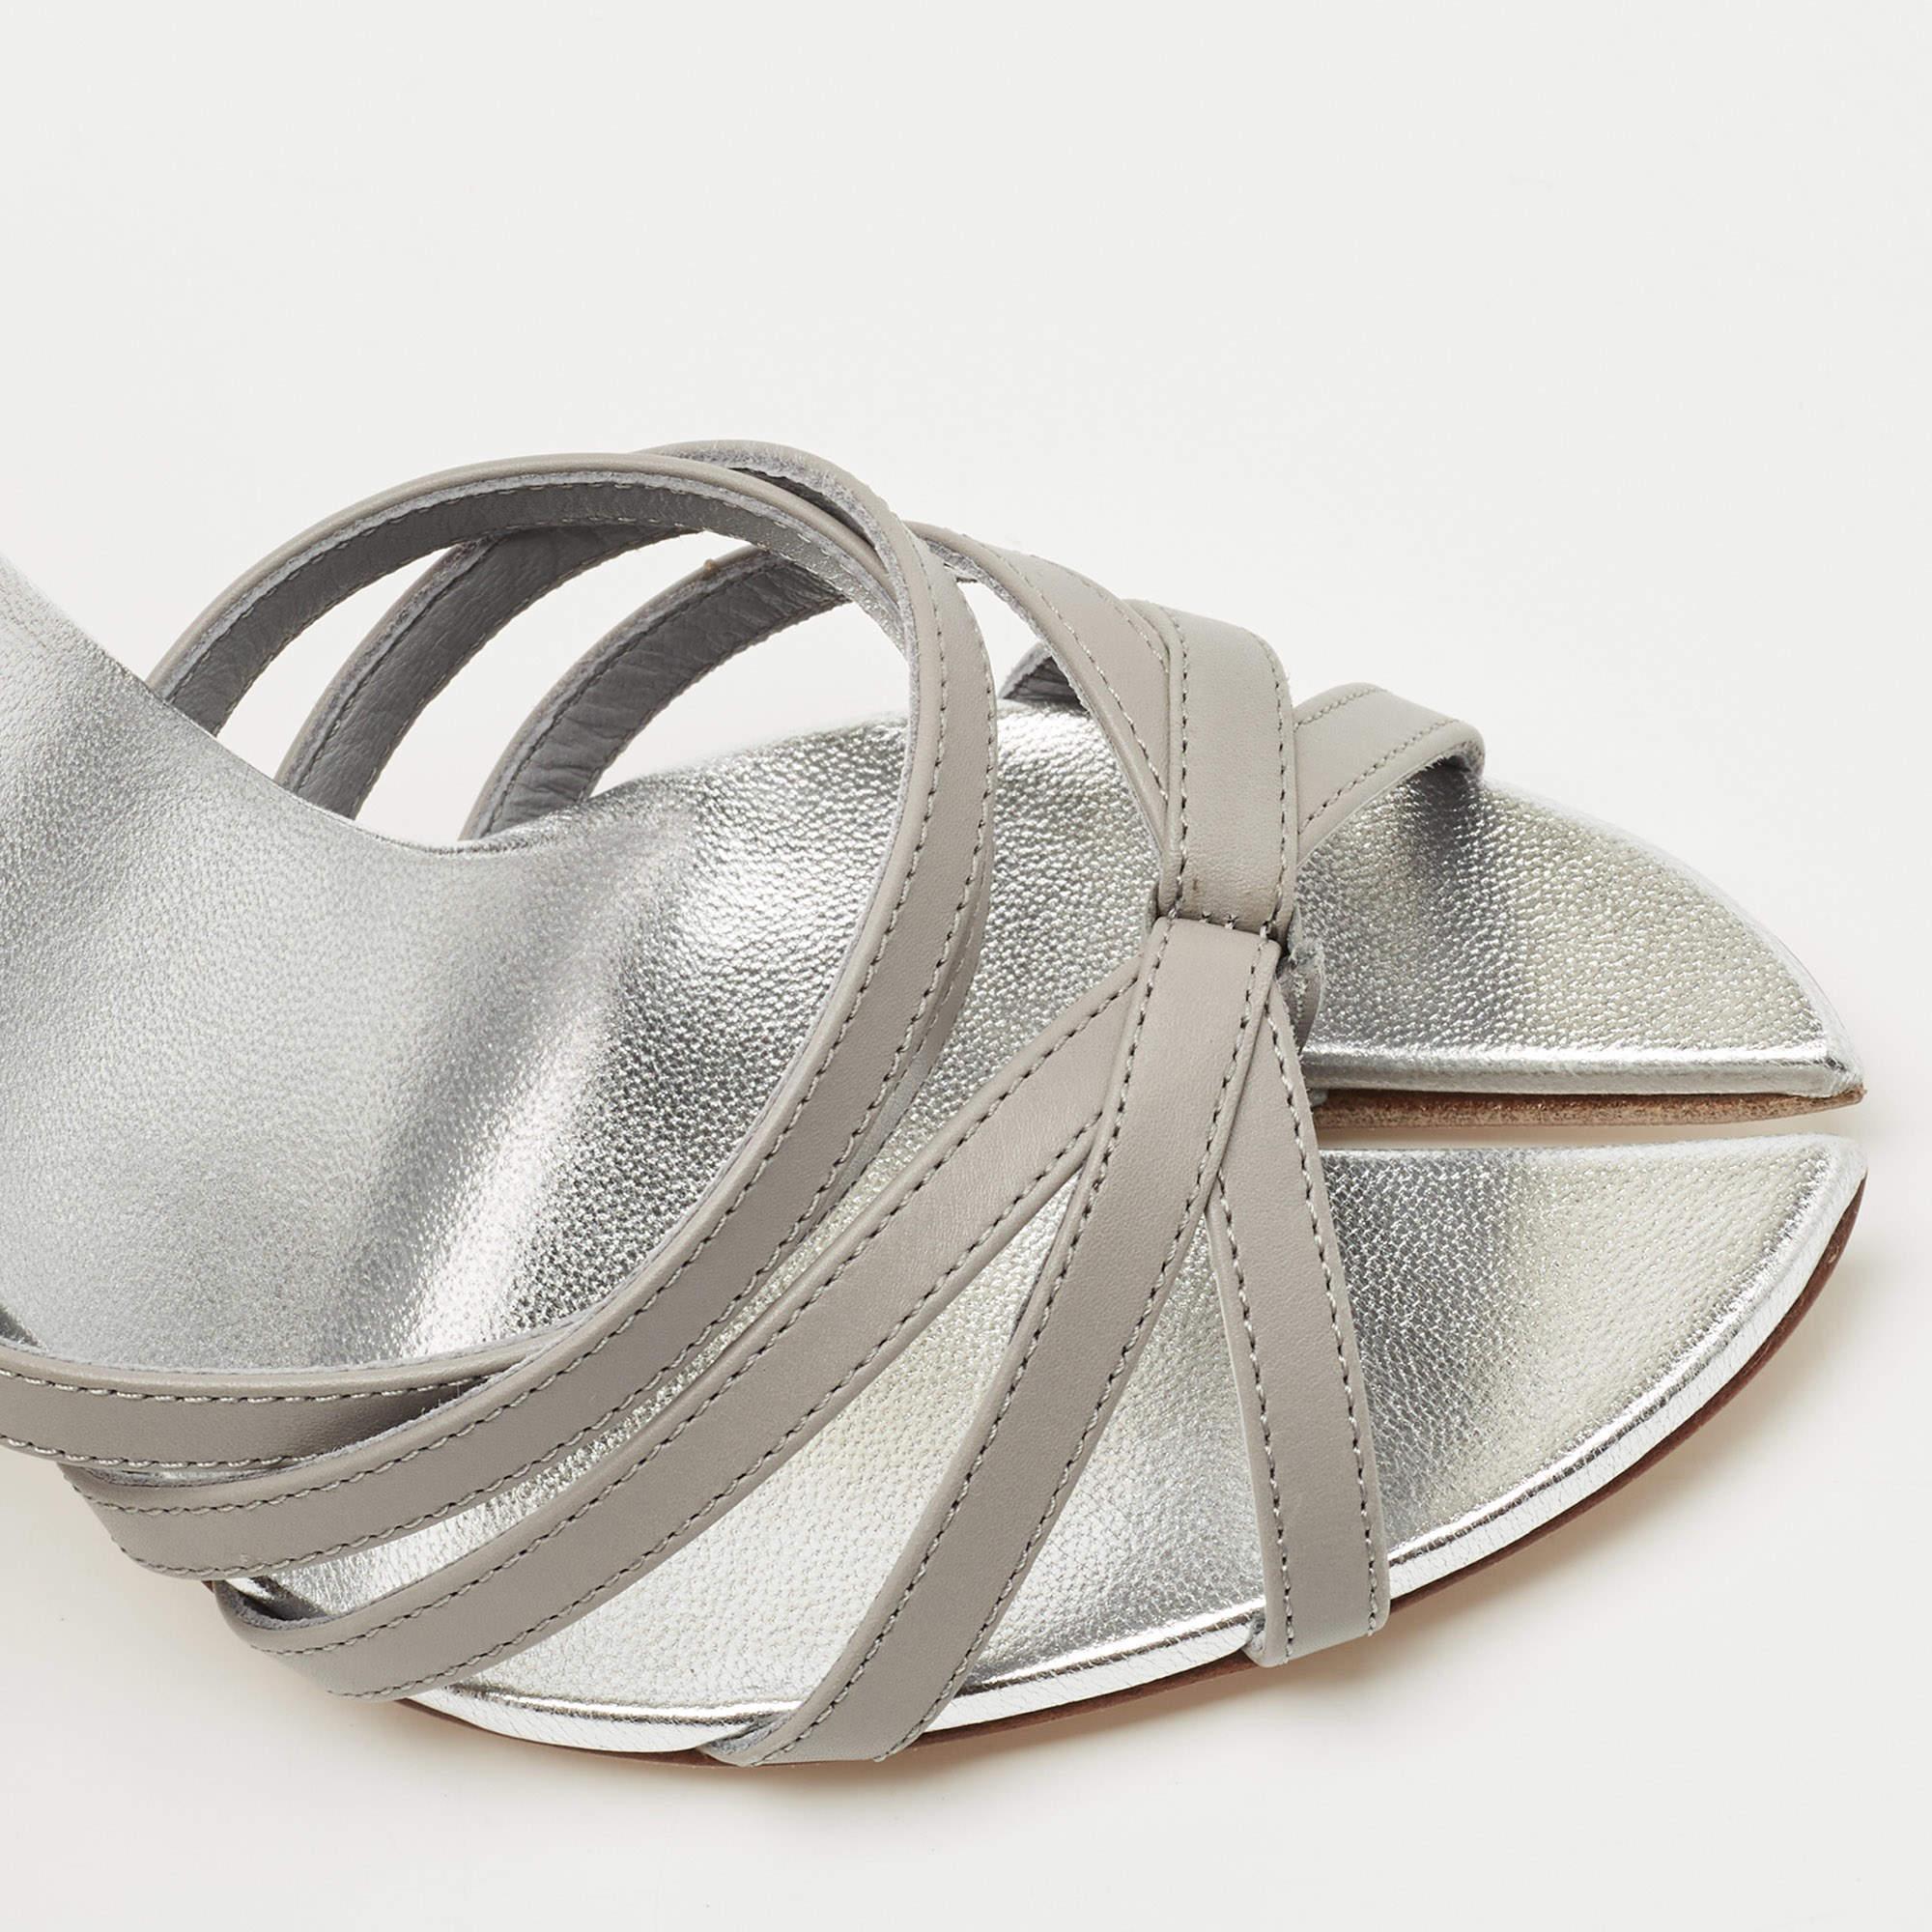 Burberry Grey Leather Hovehigh Ankle Strap Sandals Size 38 2